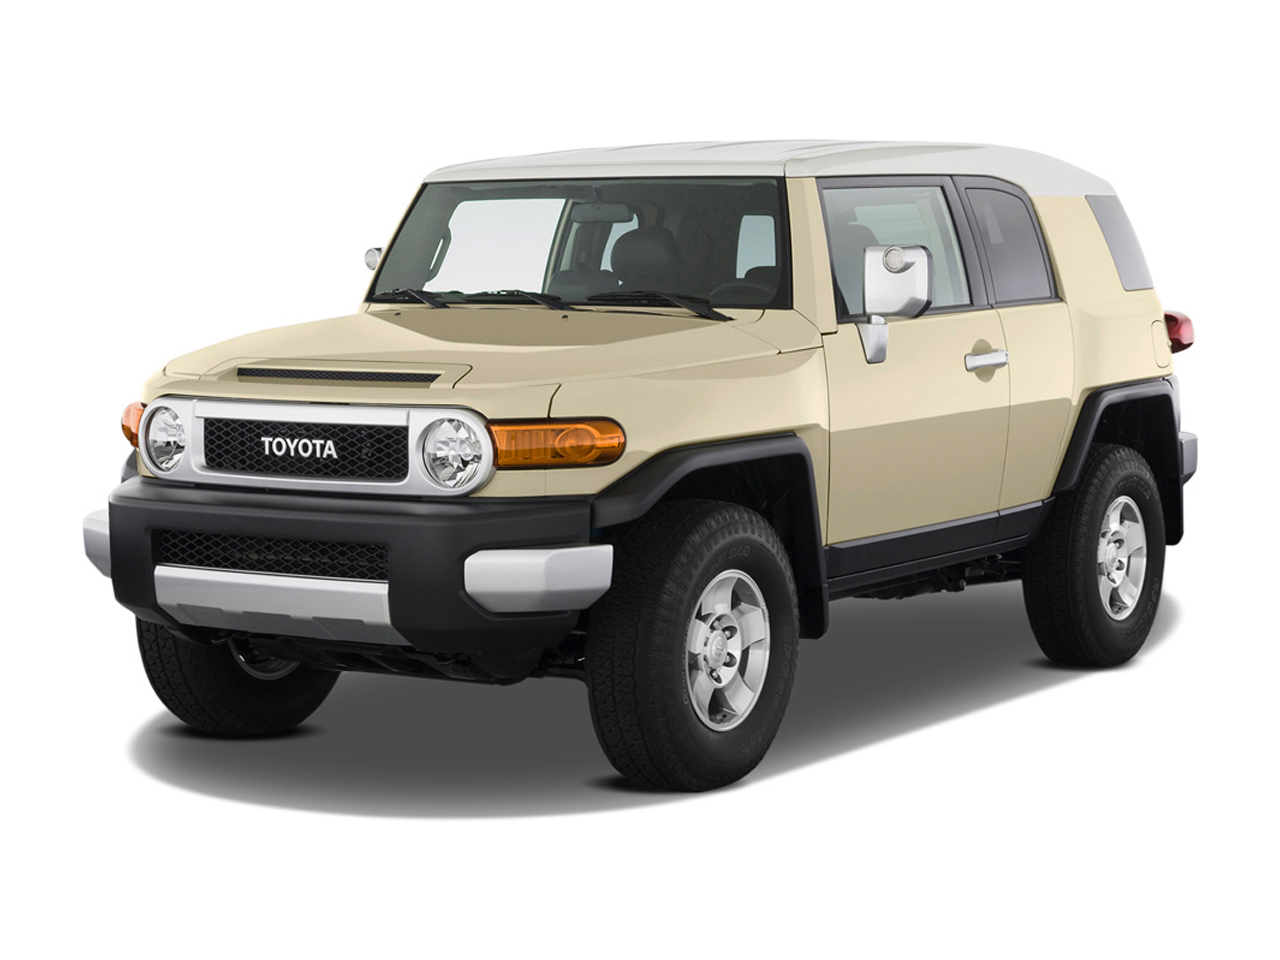 2012 Toyota Fj Cruiser Review Ratings Specs Prices And Photos